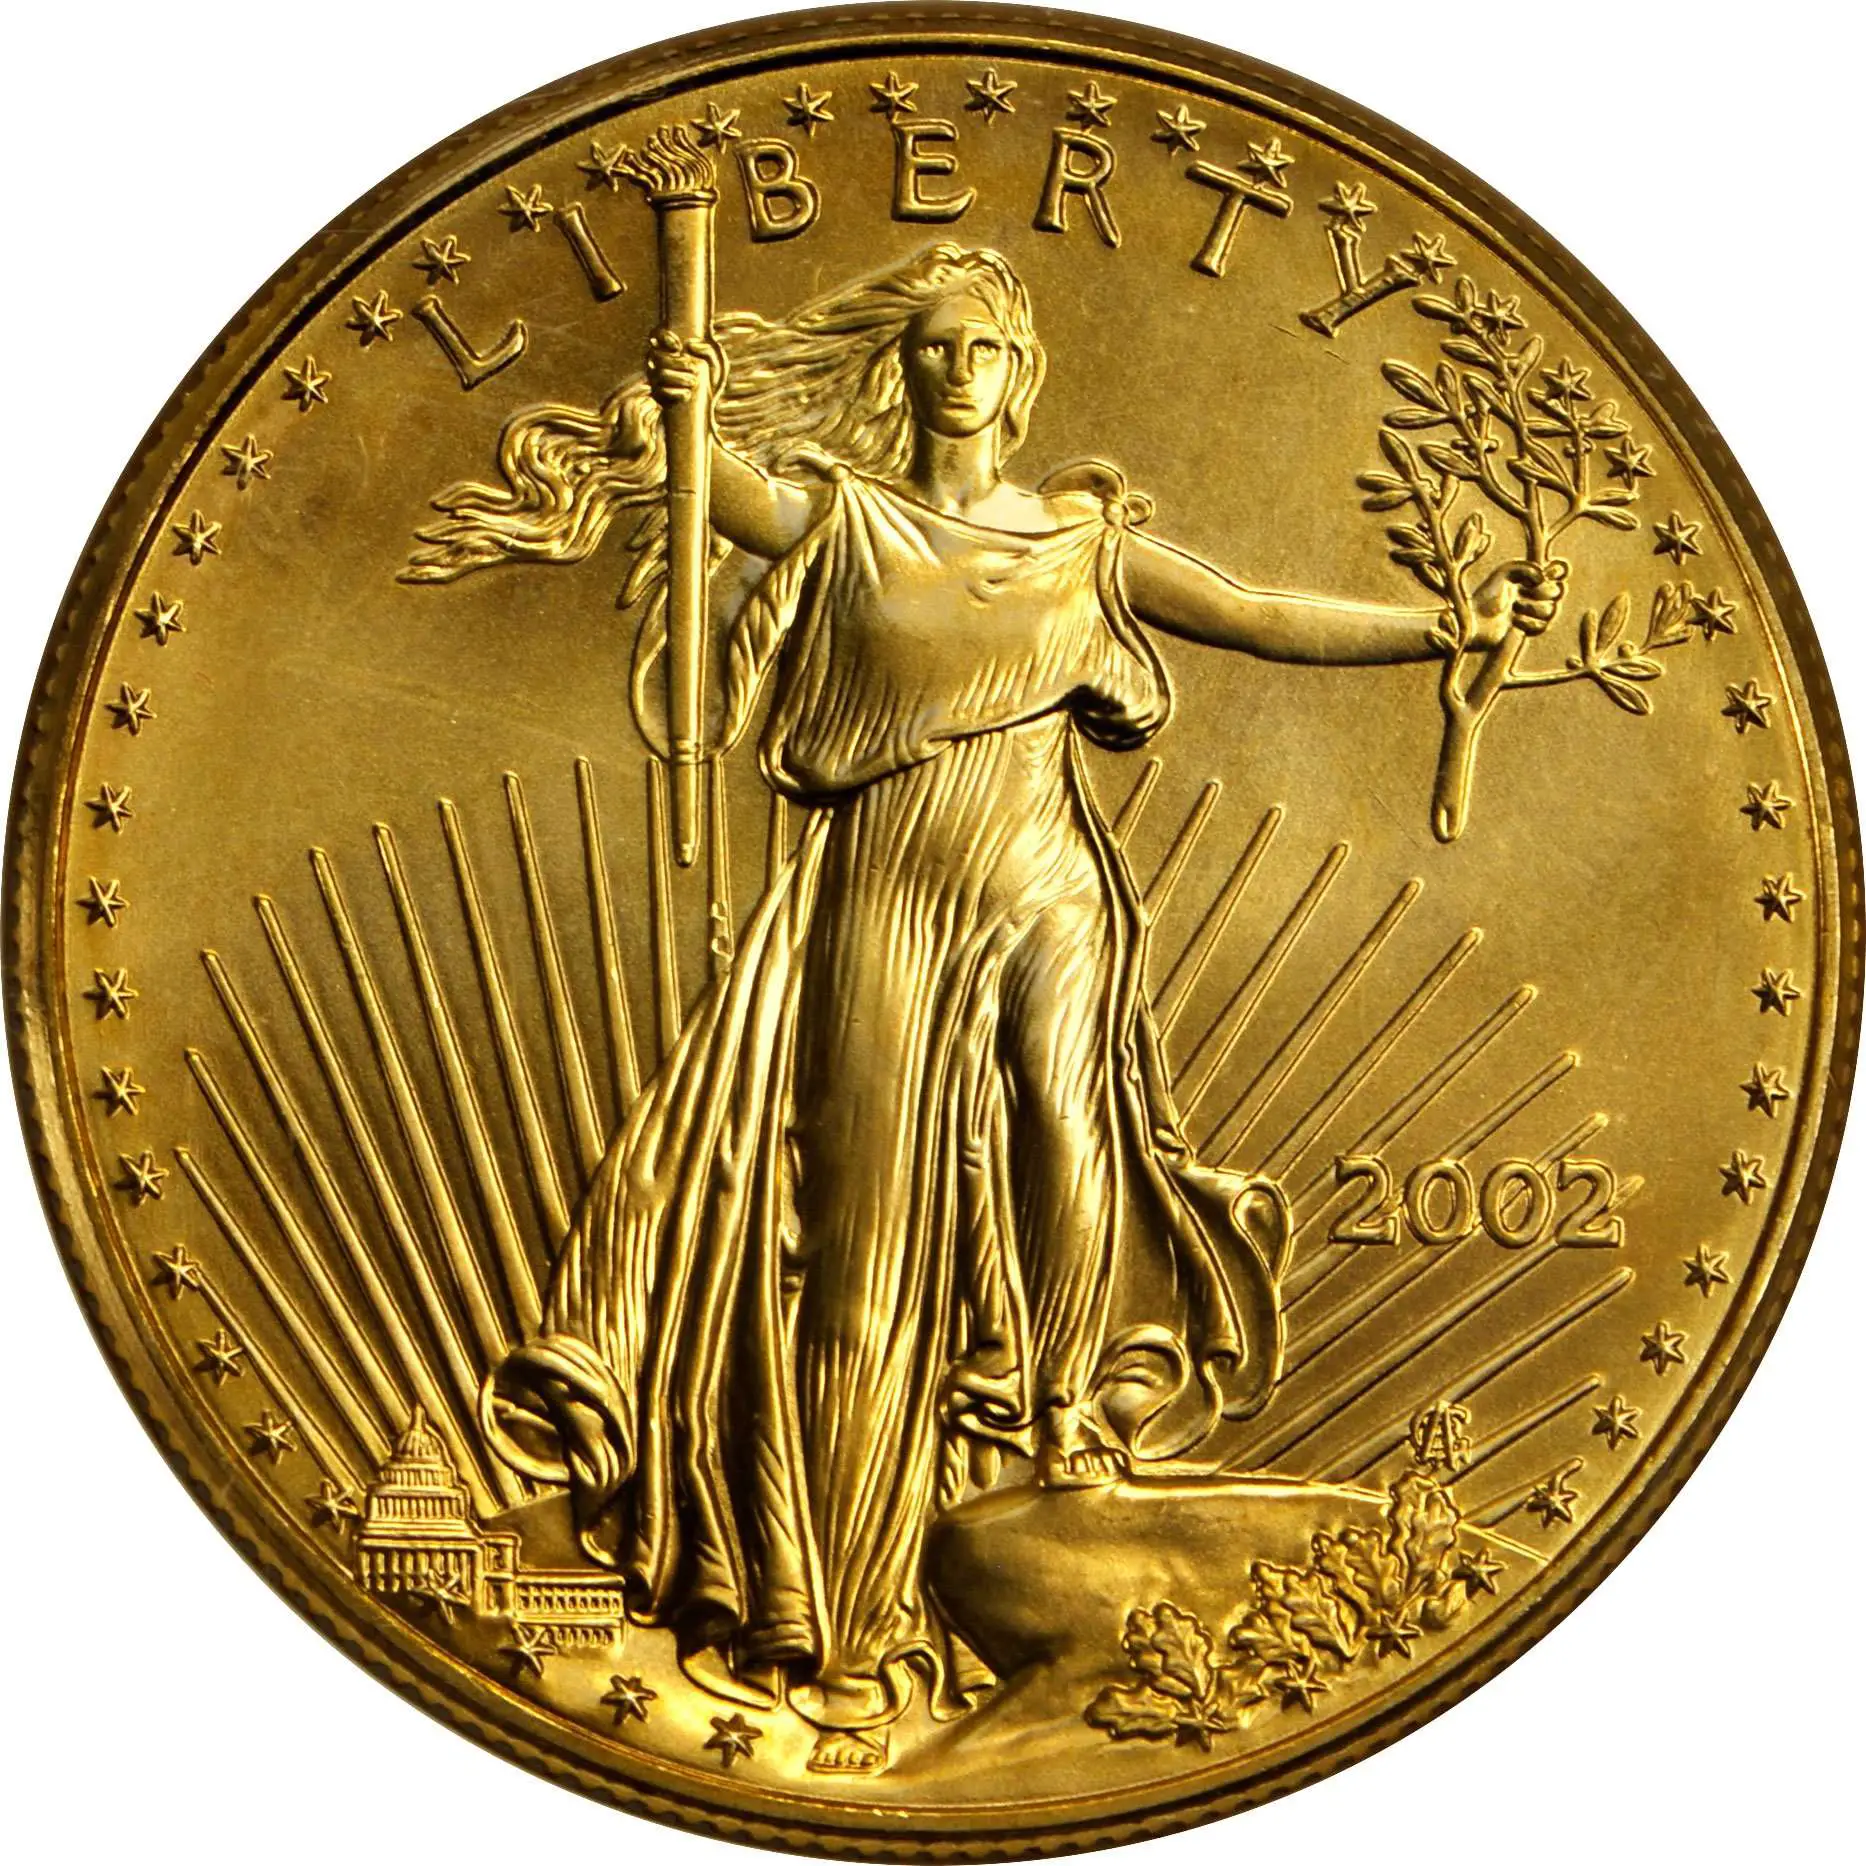 Value of 2002 $25 Gold Coin